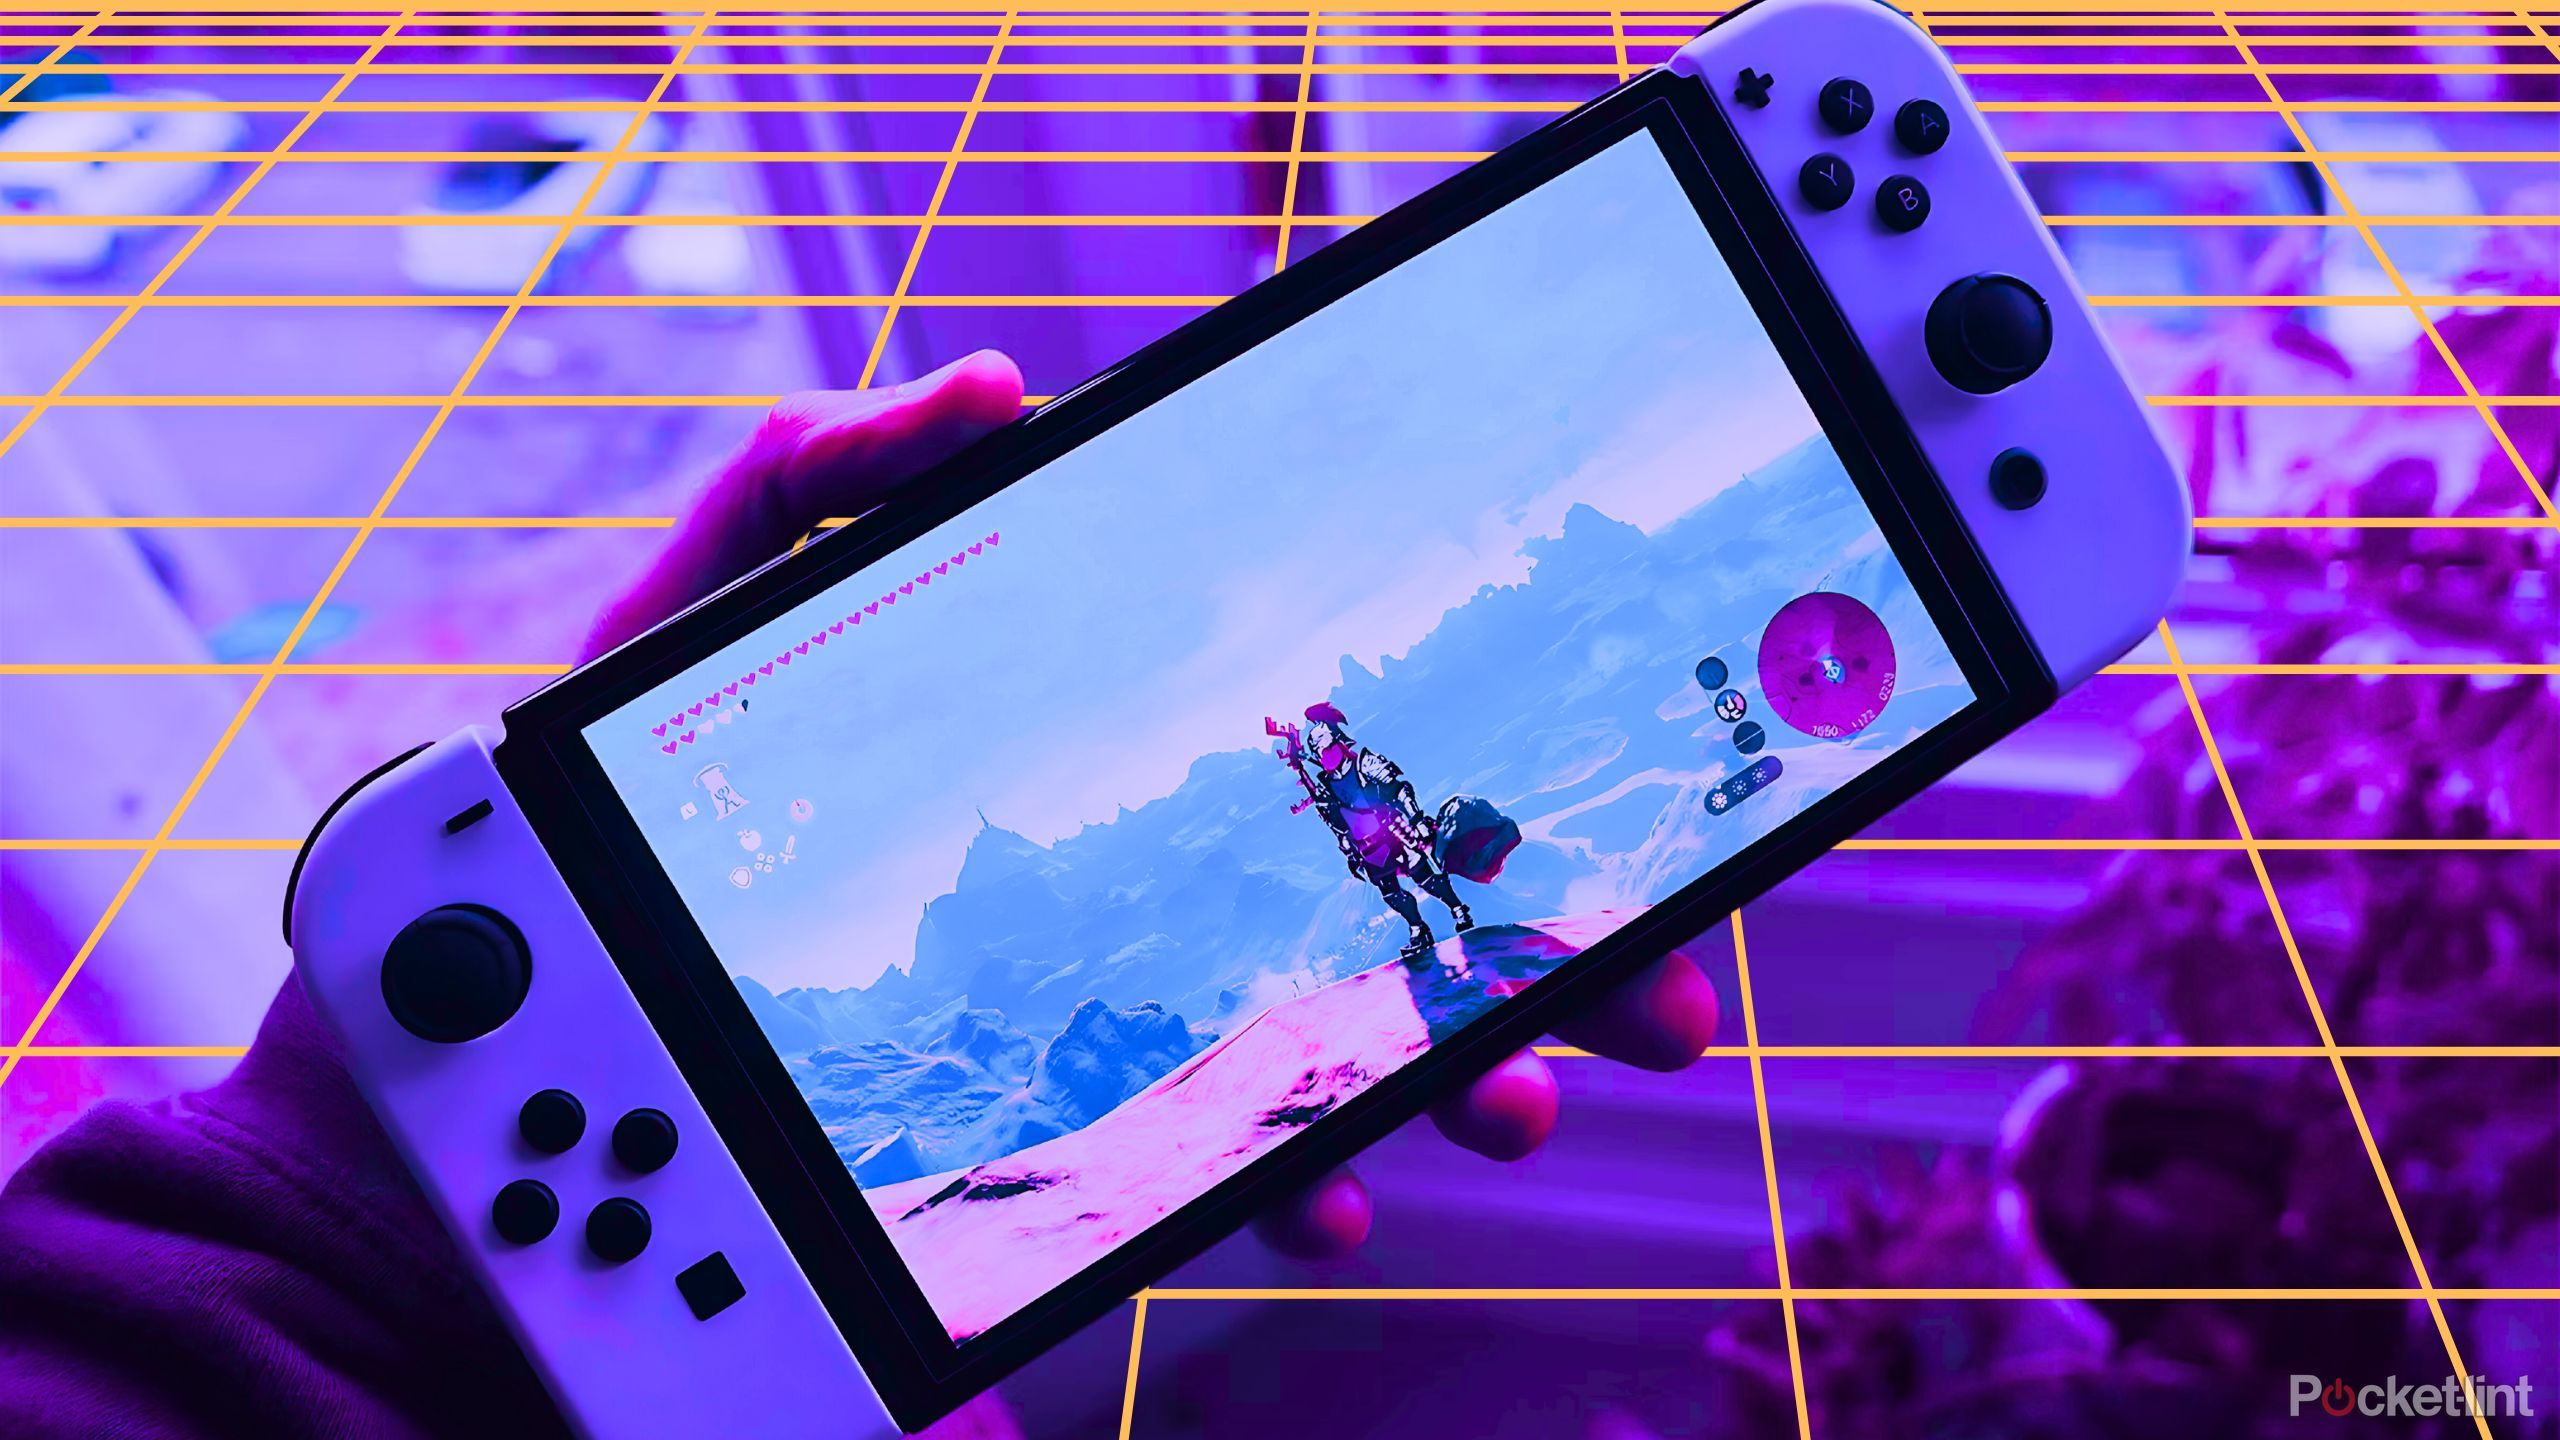 Nintendo confirms Switch successor is in the works